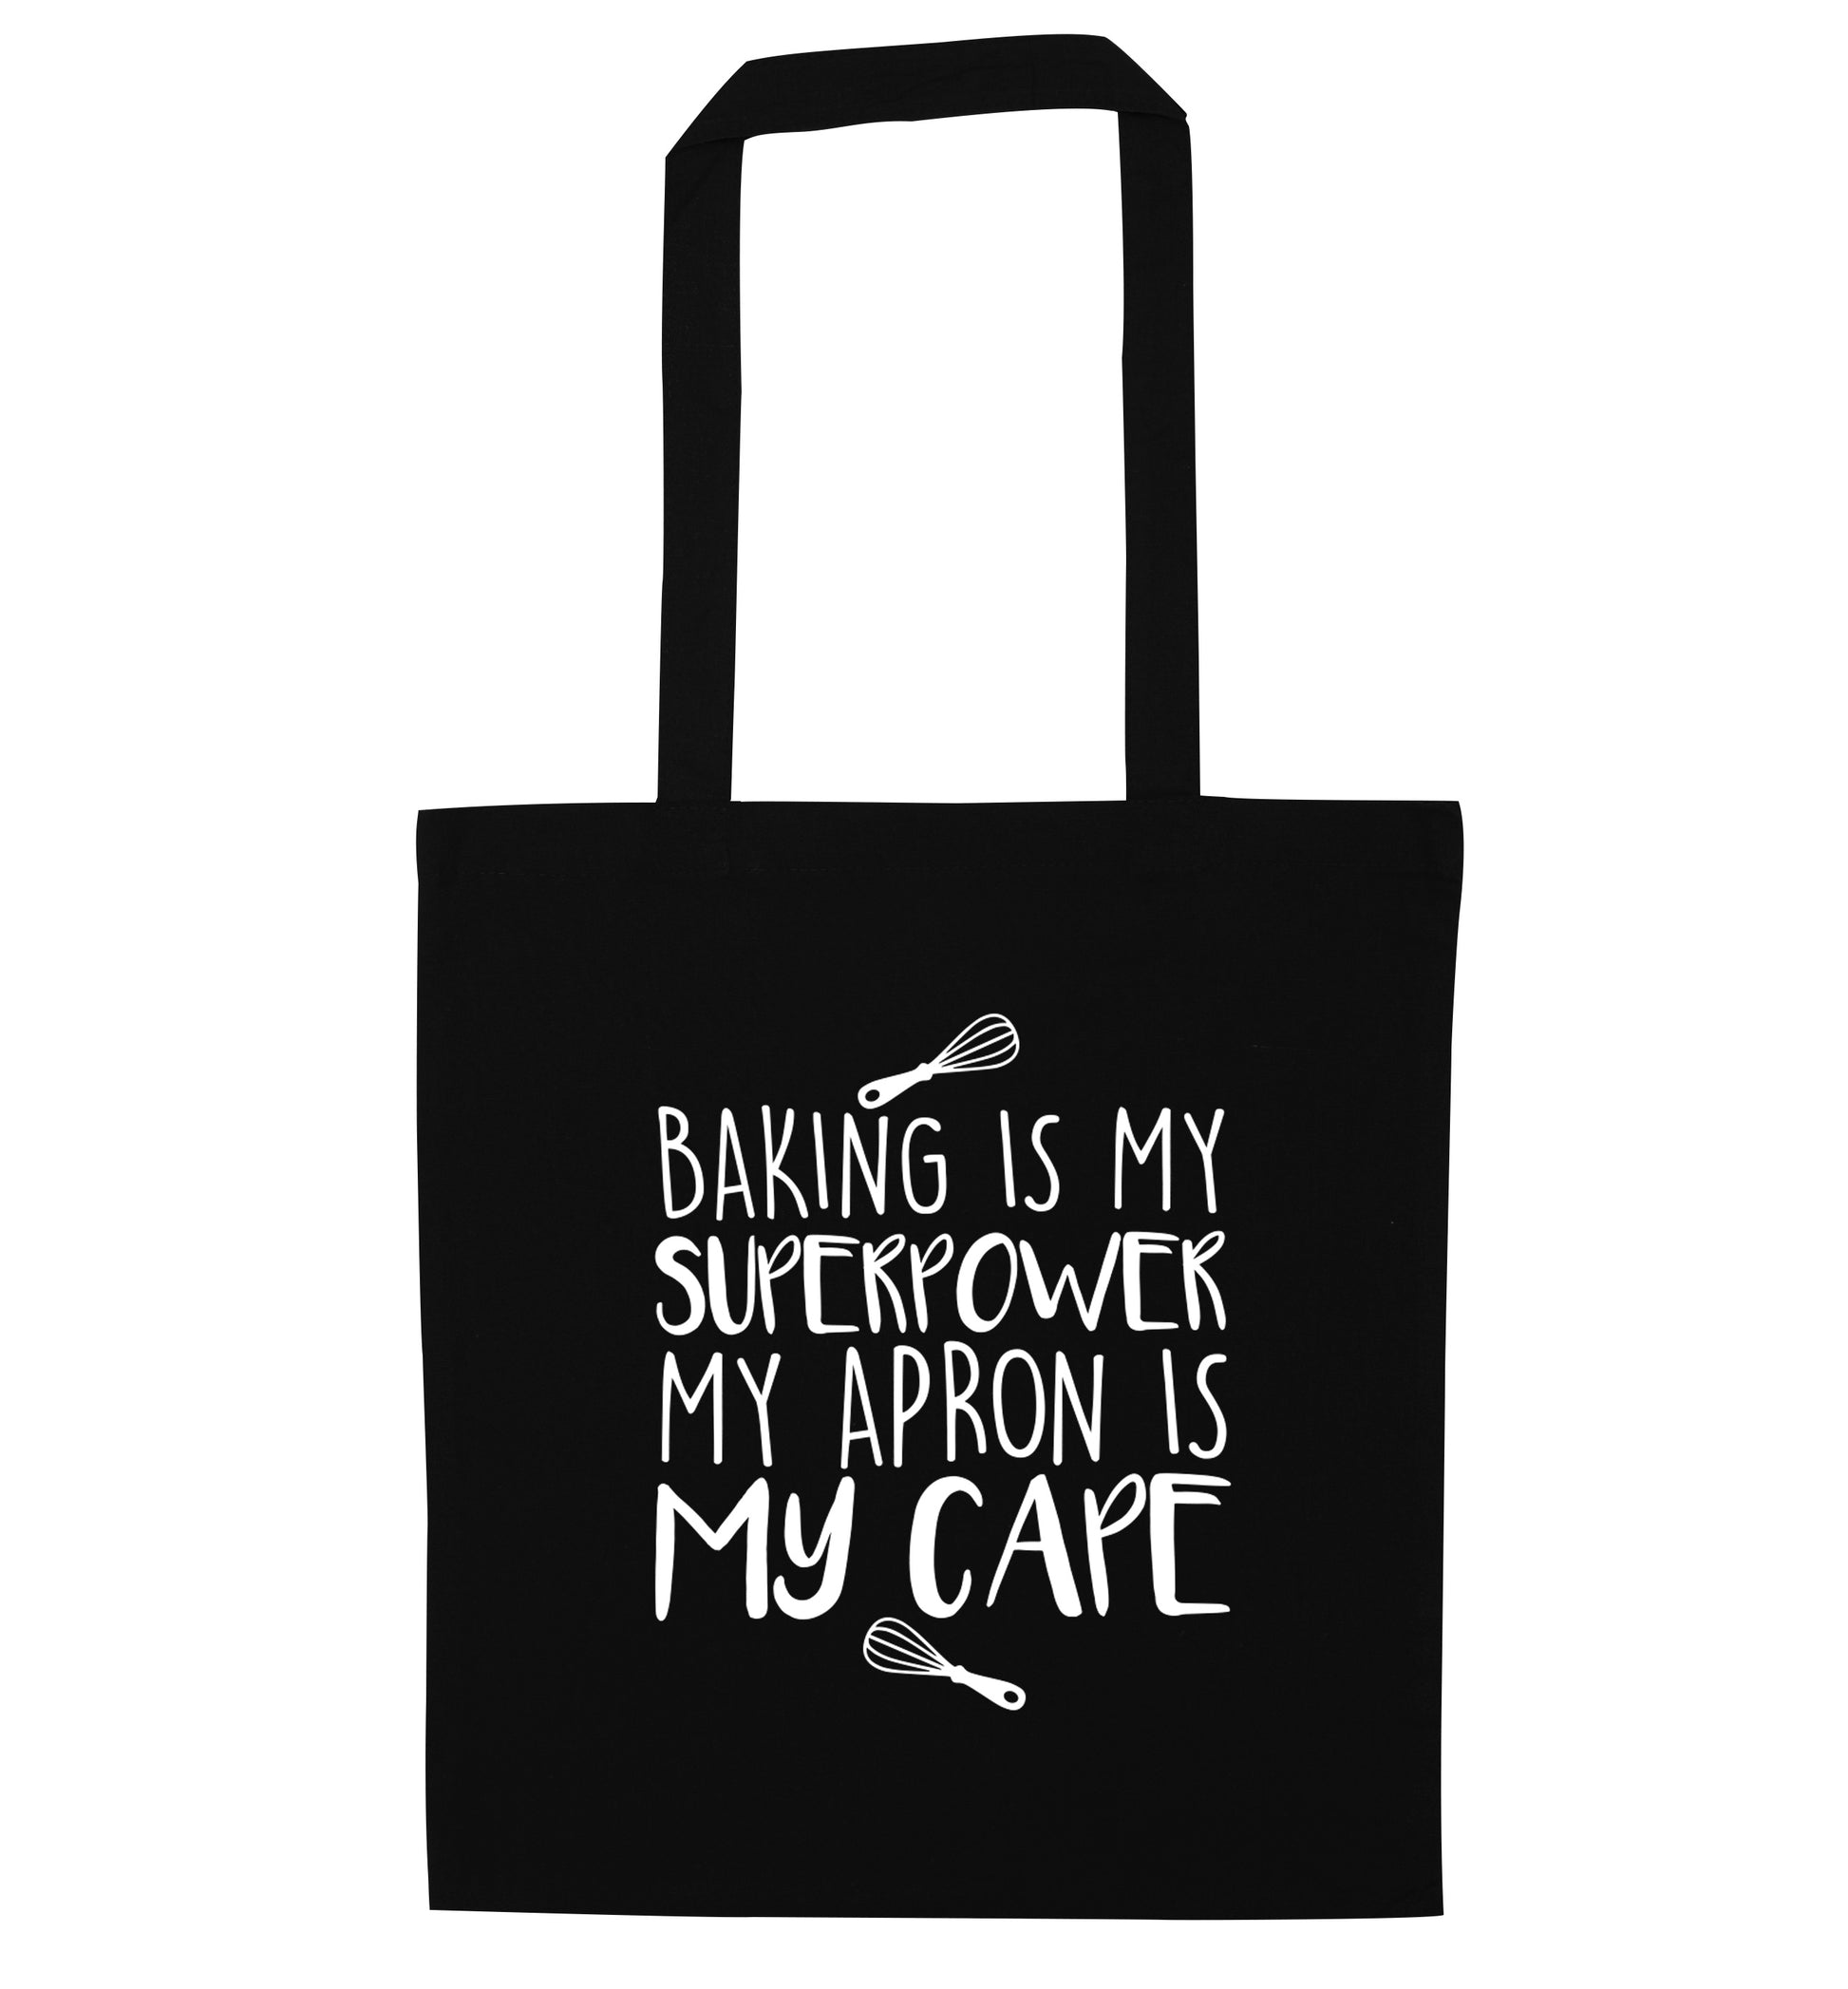 Baking is my superpower my apron is my cape black tote bag